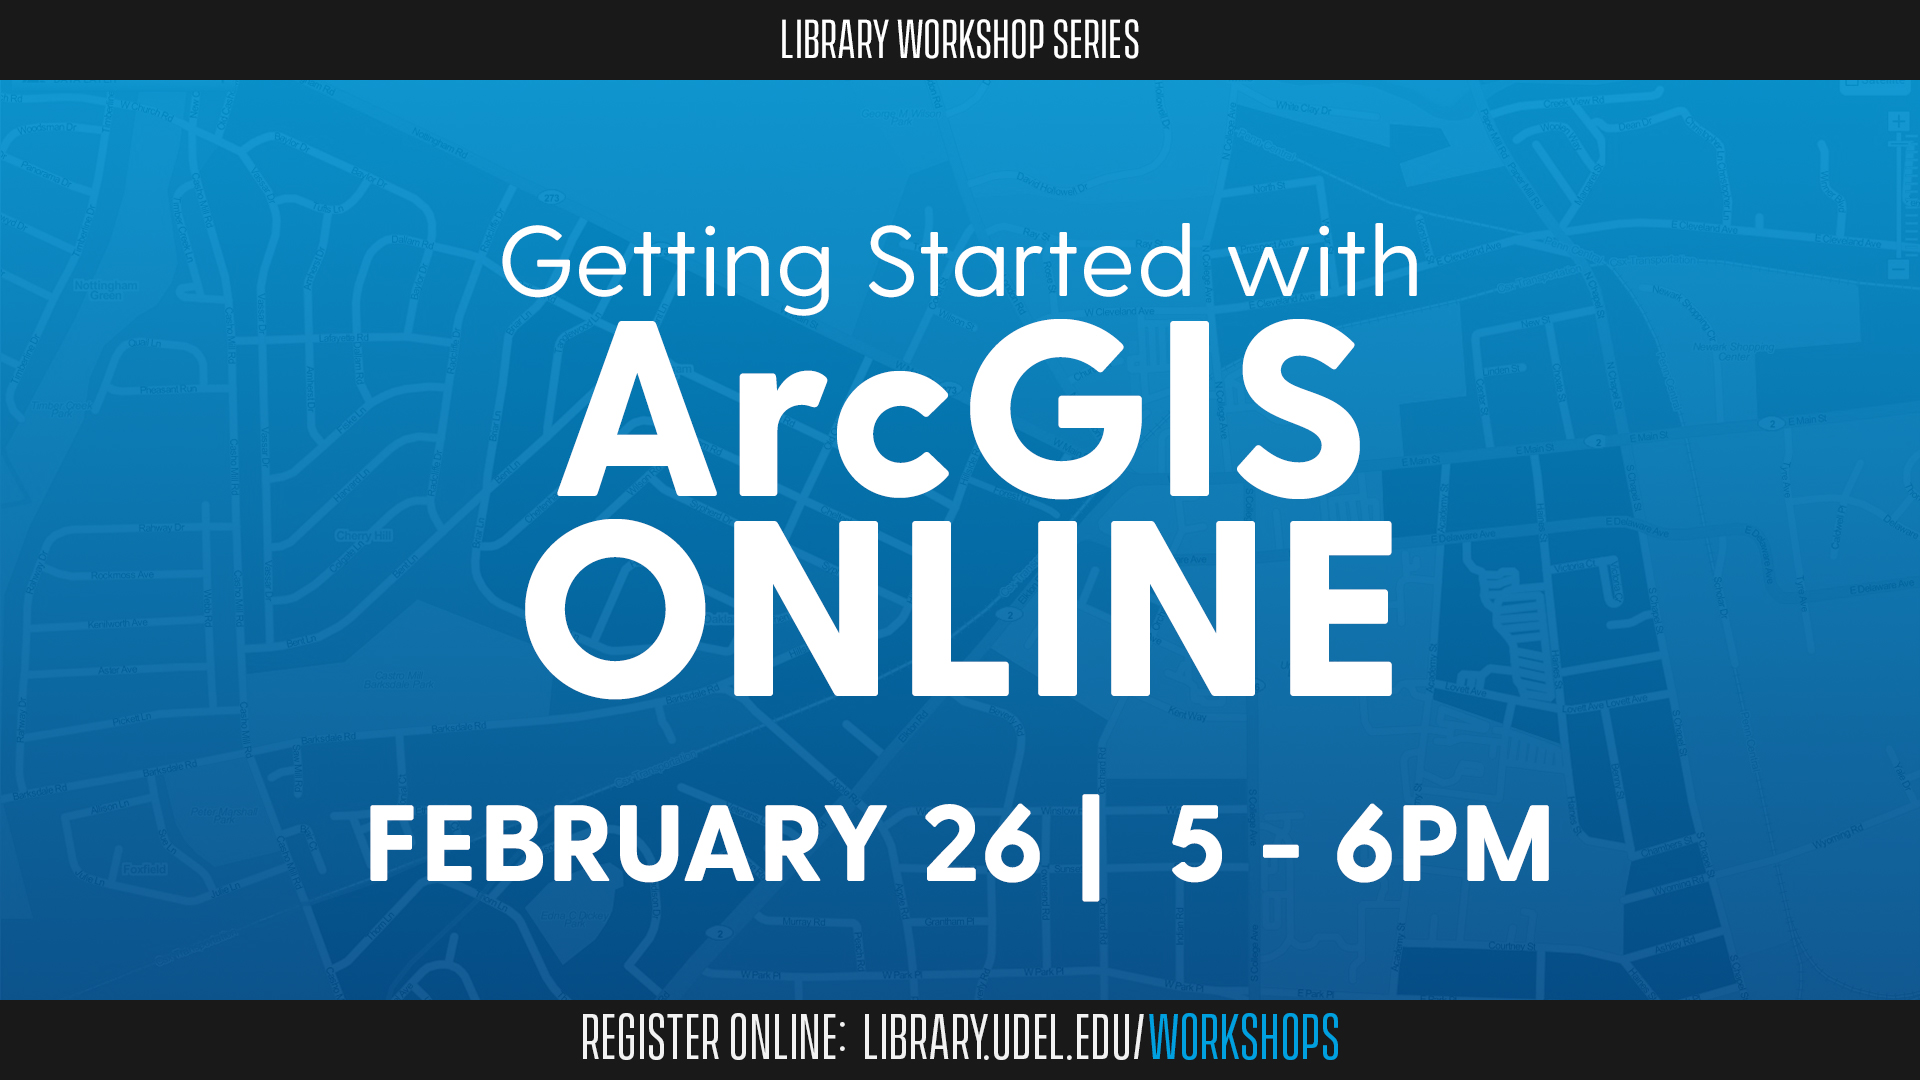 Promotional image for Getting Started with ArcGIS Online